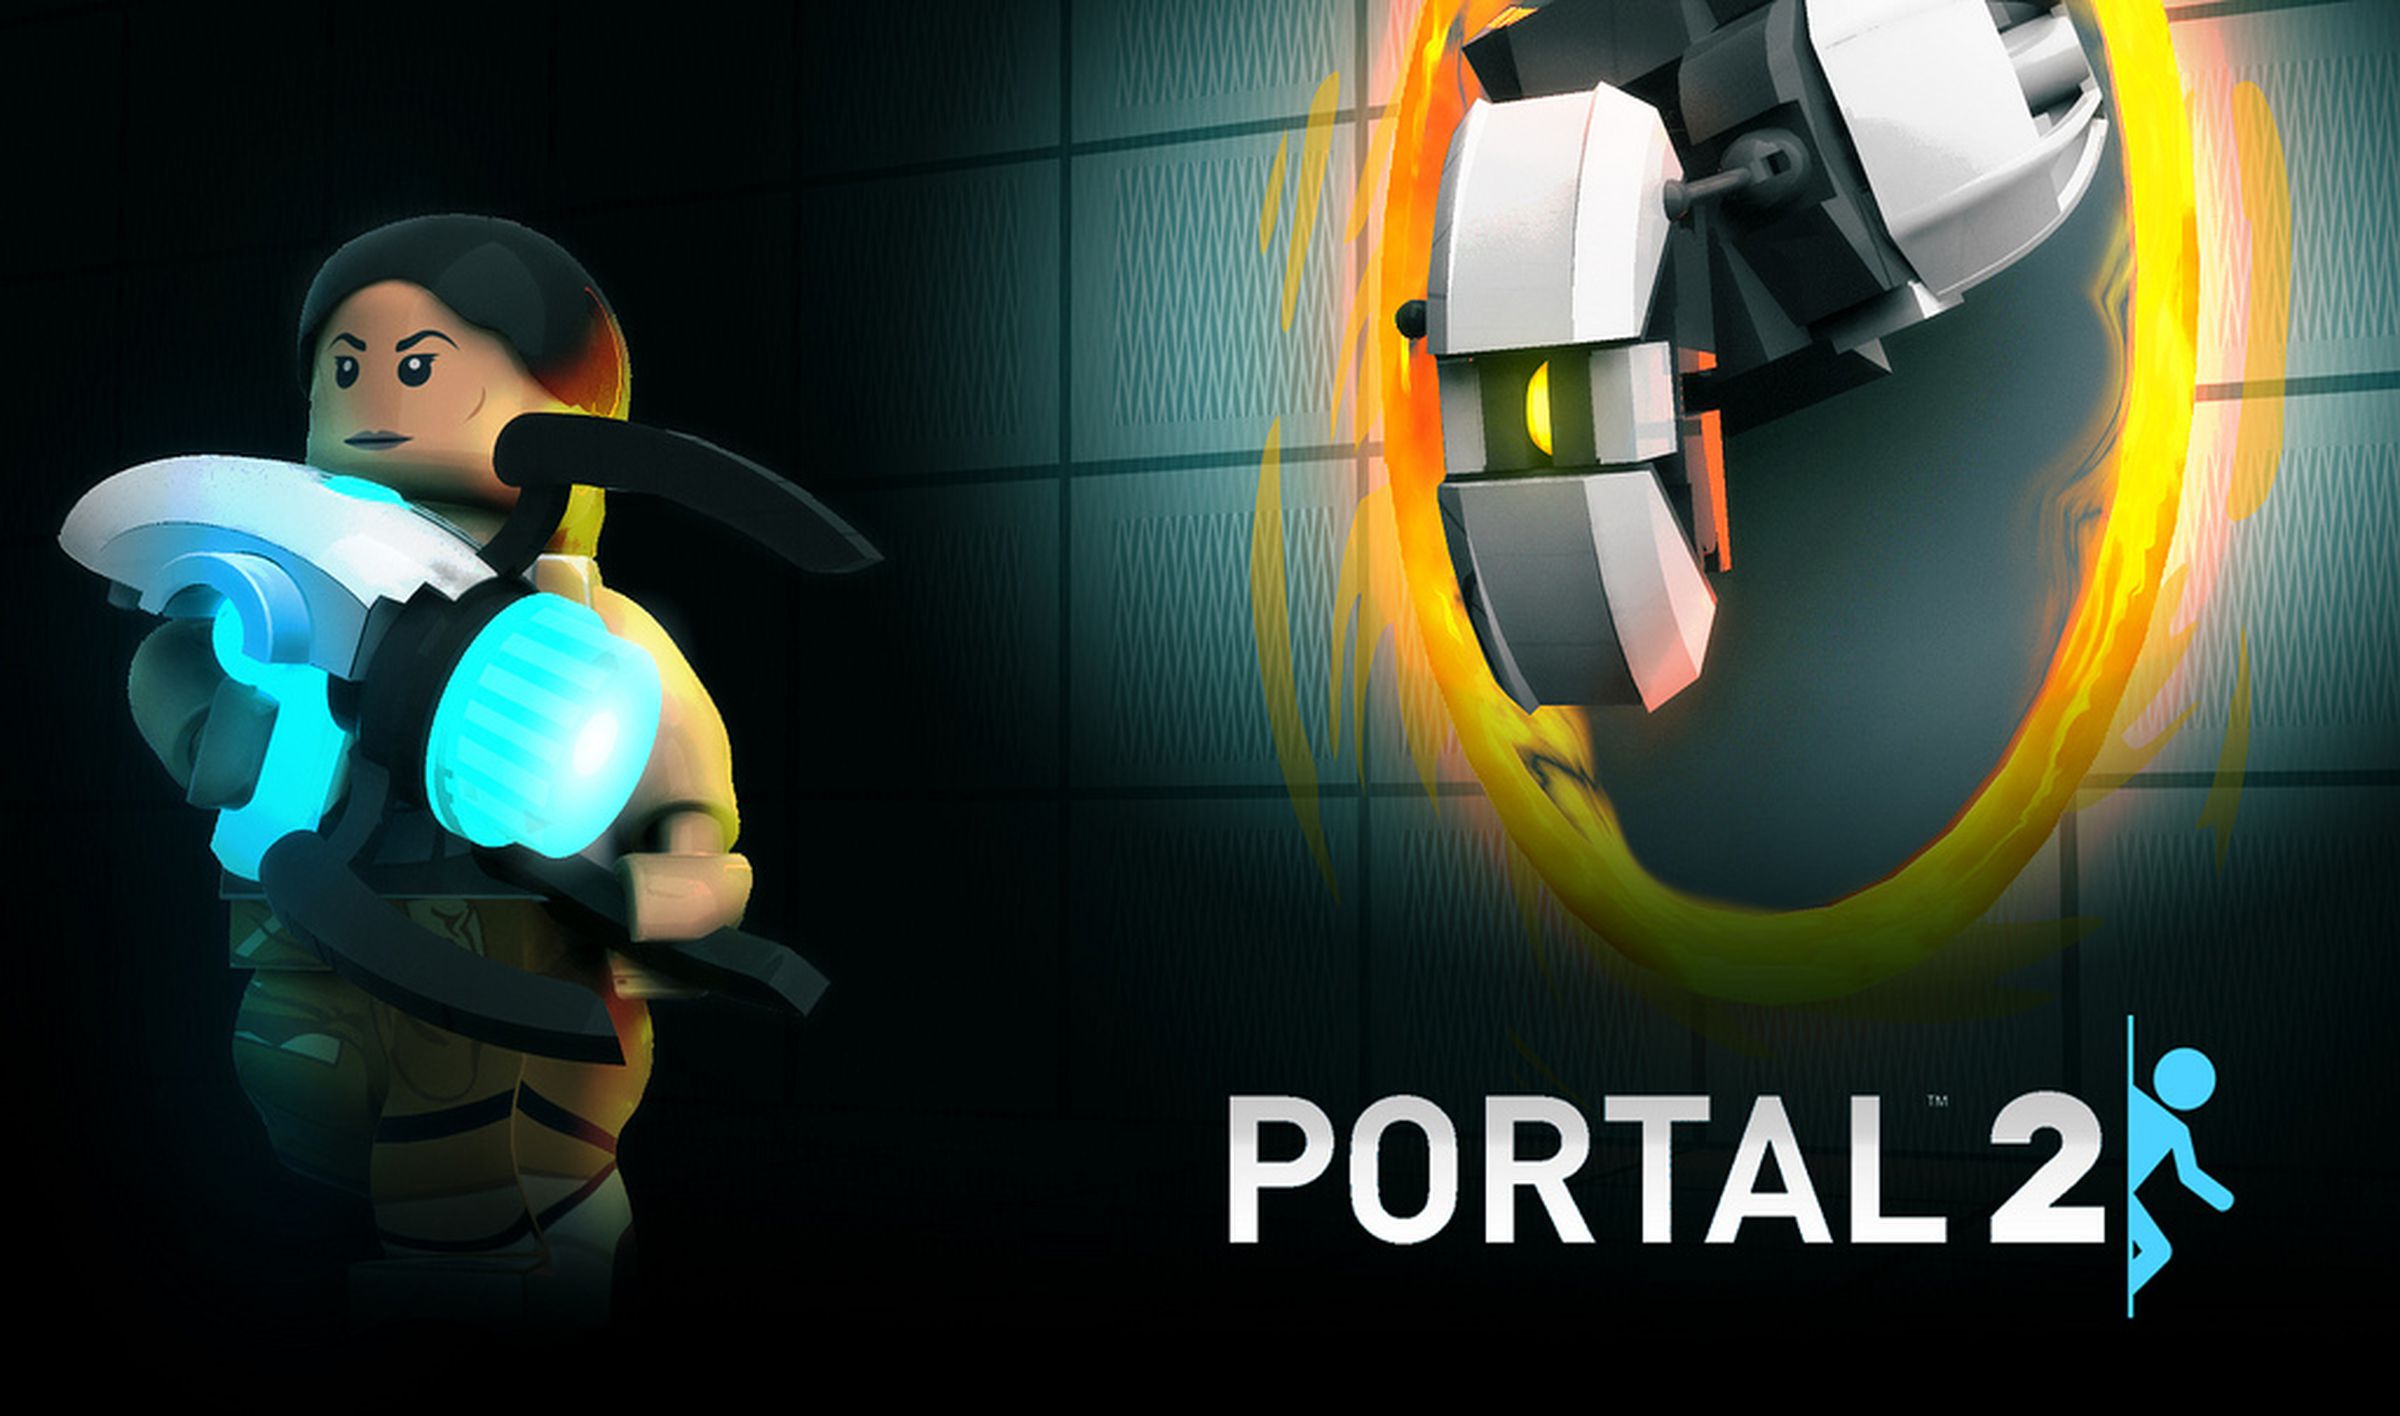 Images of the 'Portal' Lego project on Lego Cuusoo